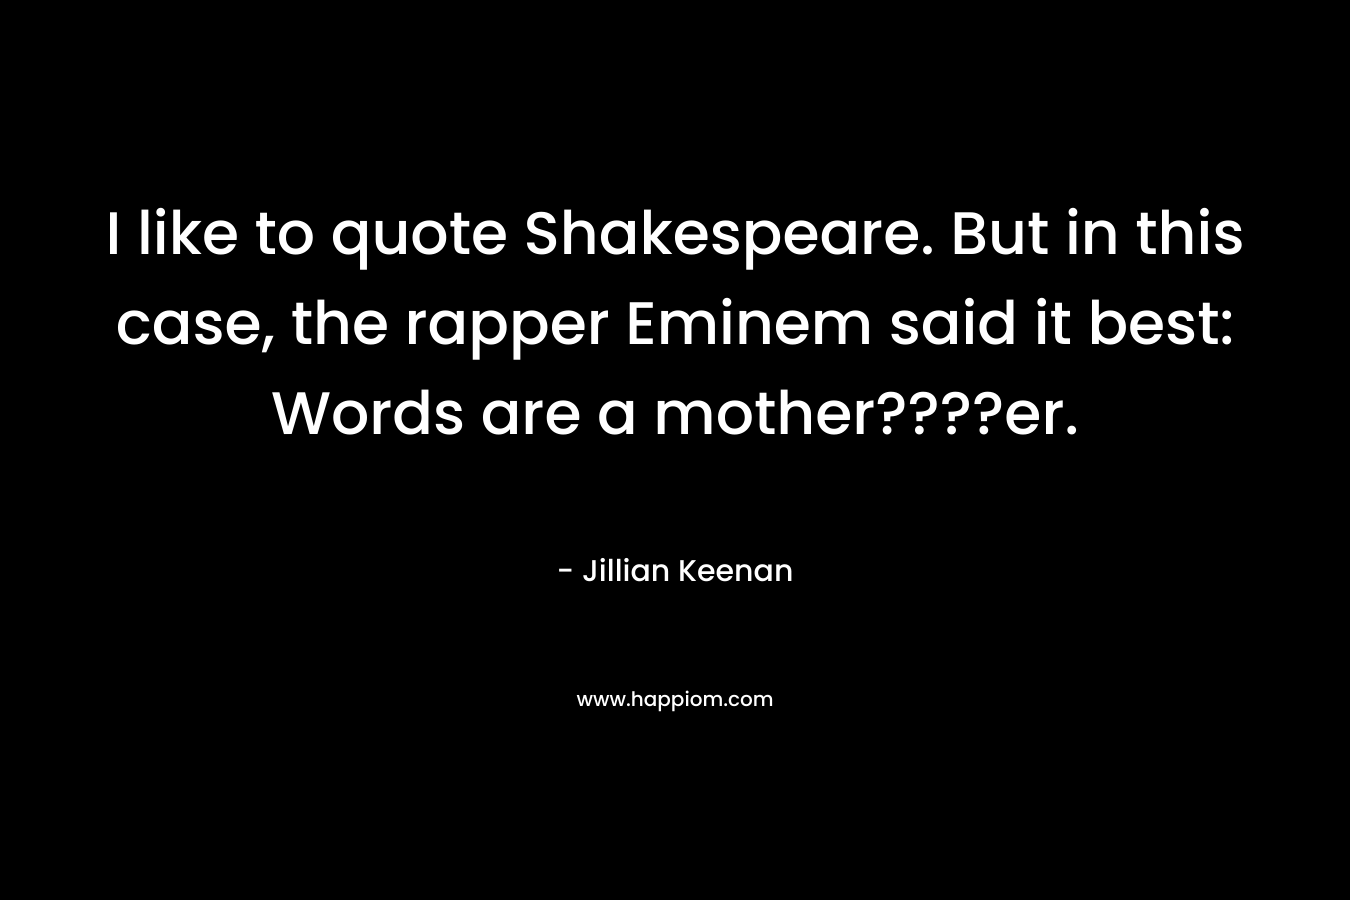 I like to quote Shakespeare. But in this case, the rapper Eminem said it best: Words are a mother????er.